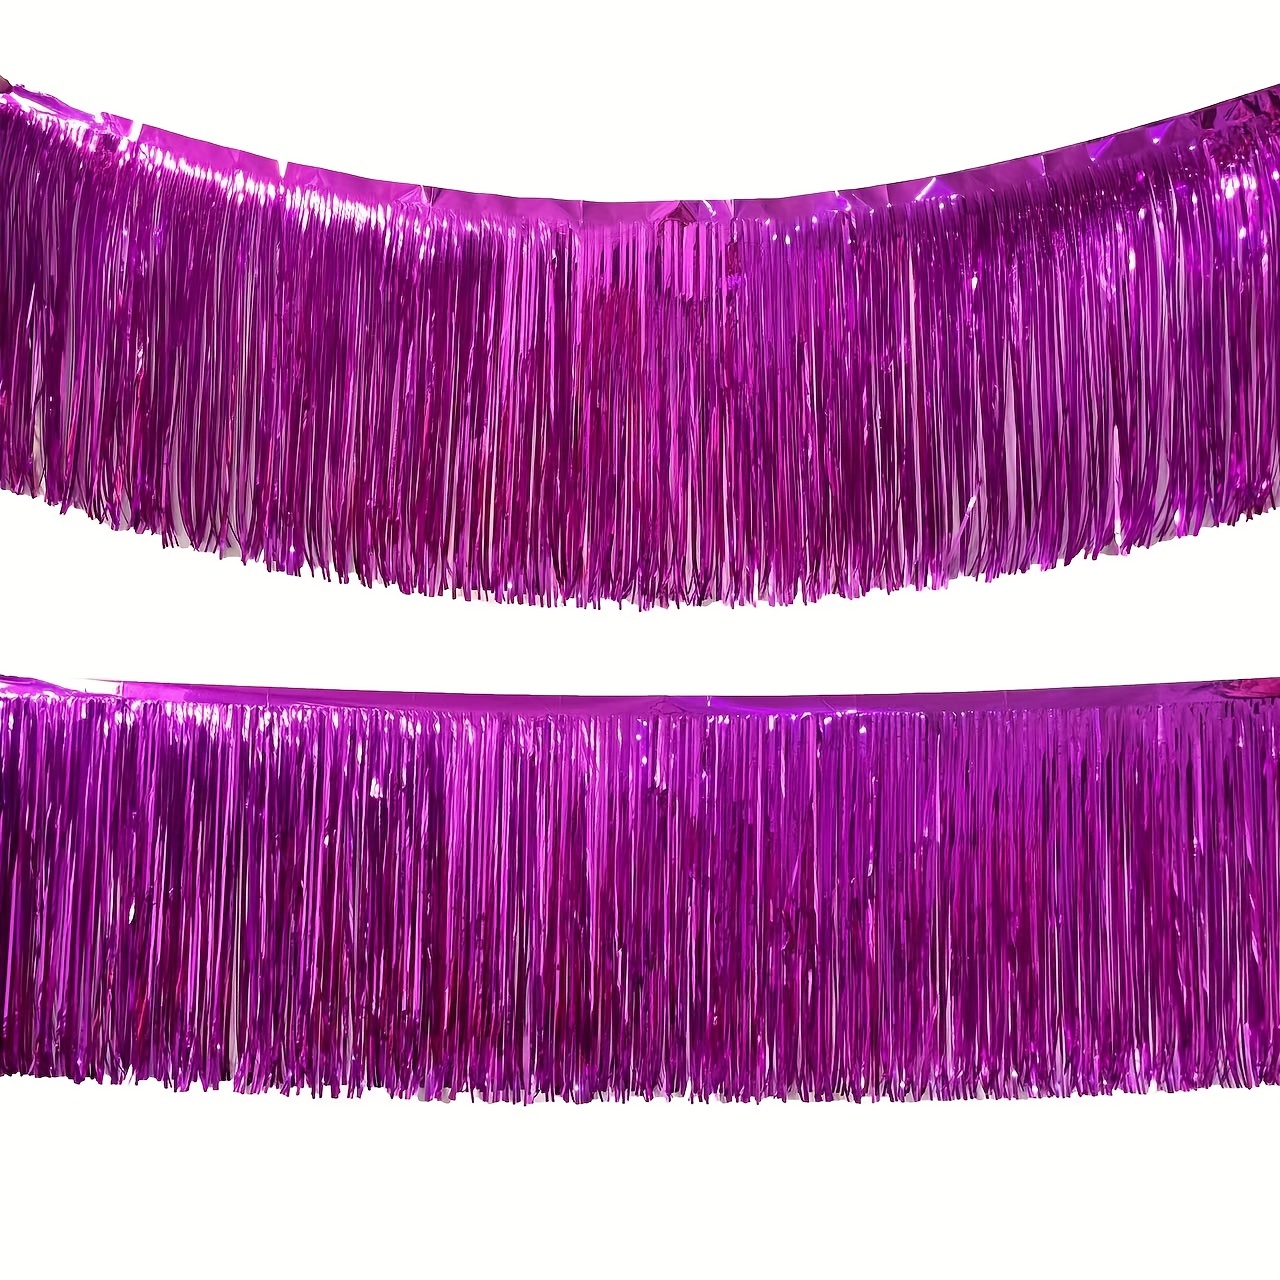 Pink Streamers 